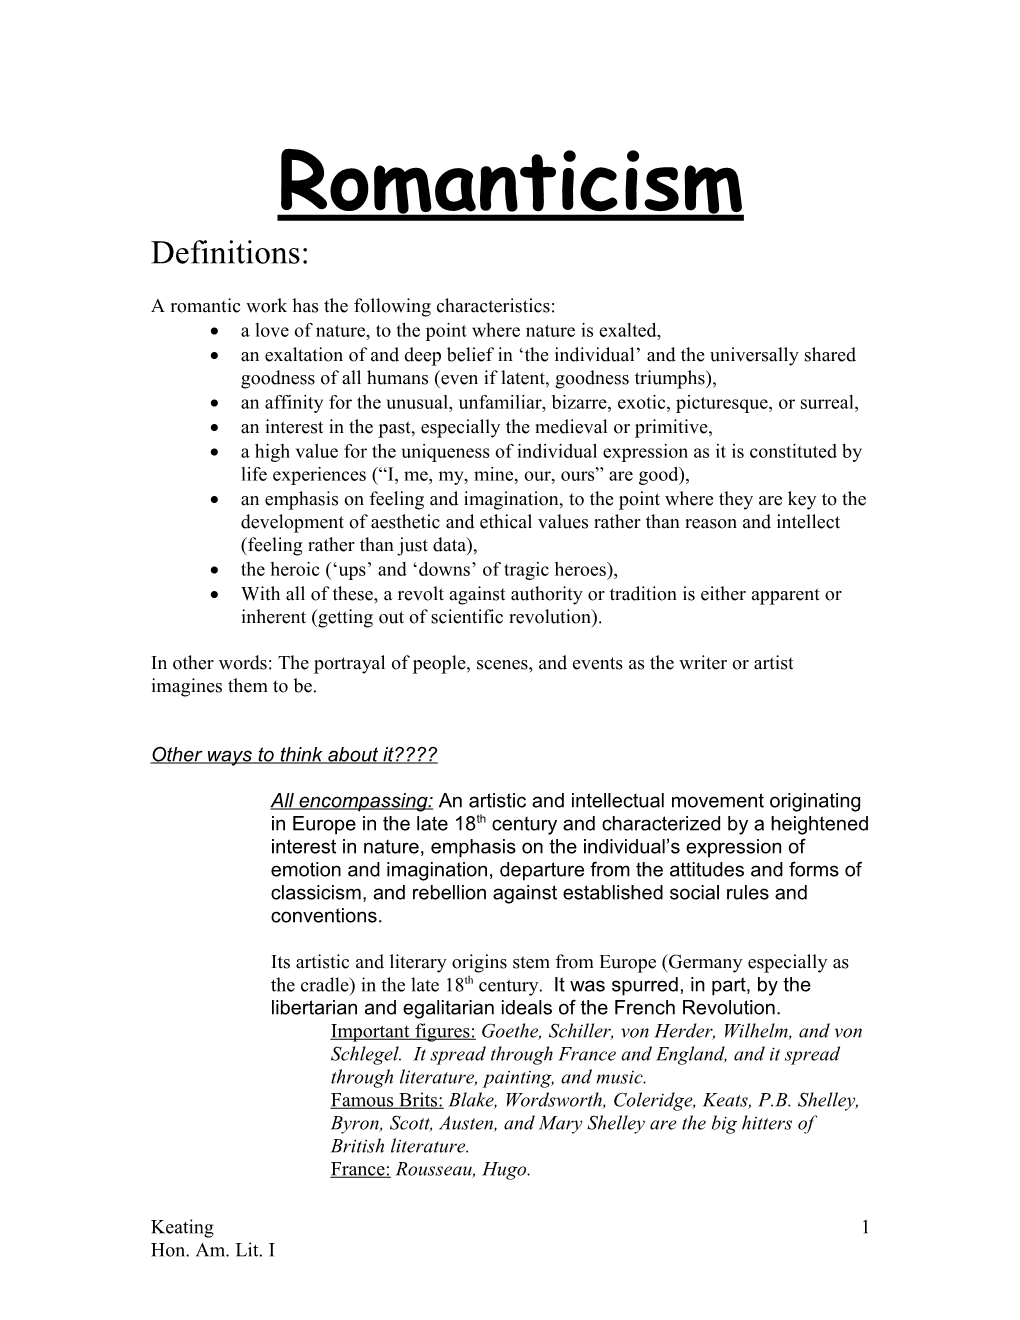 A Romantic Work Has the Following Characteristics